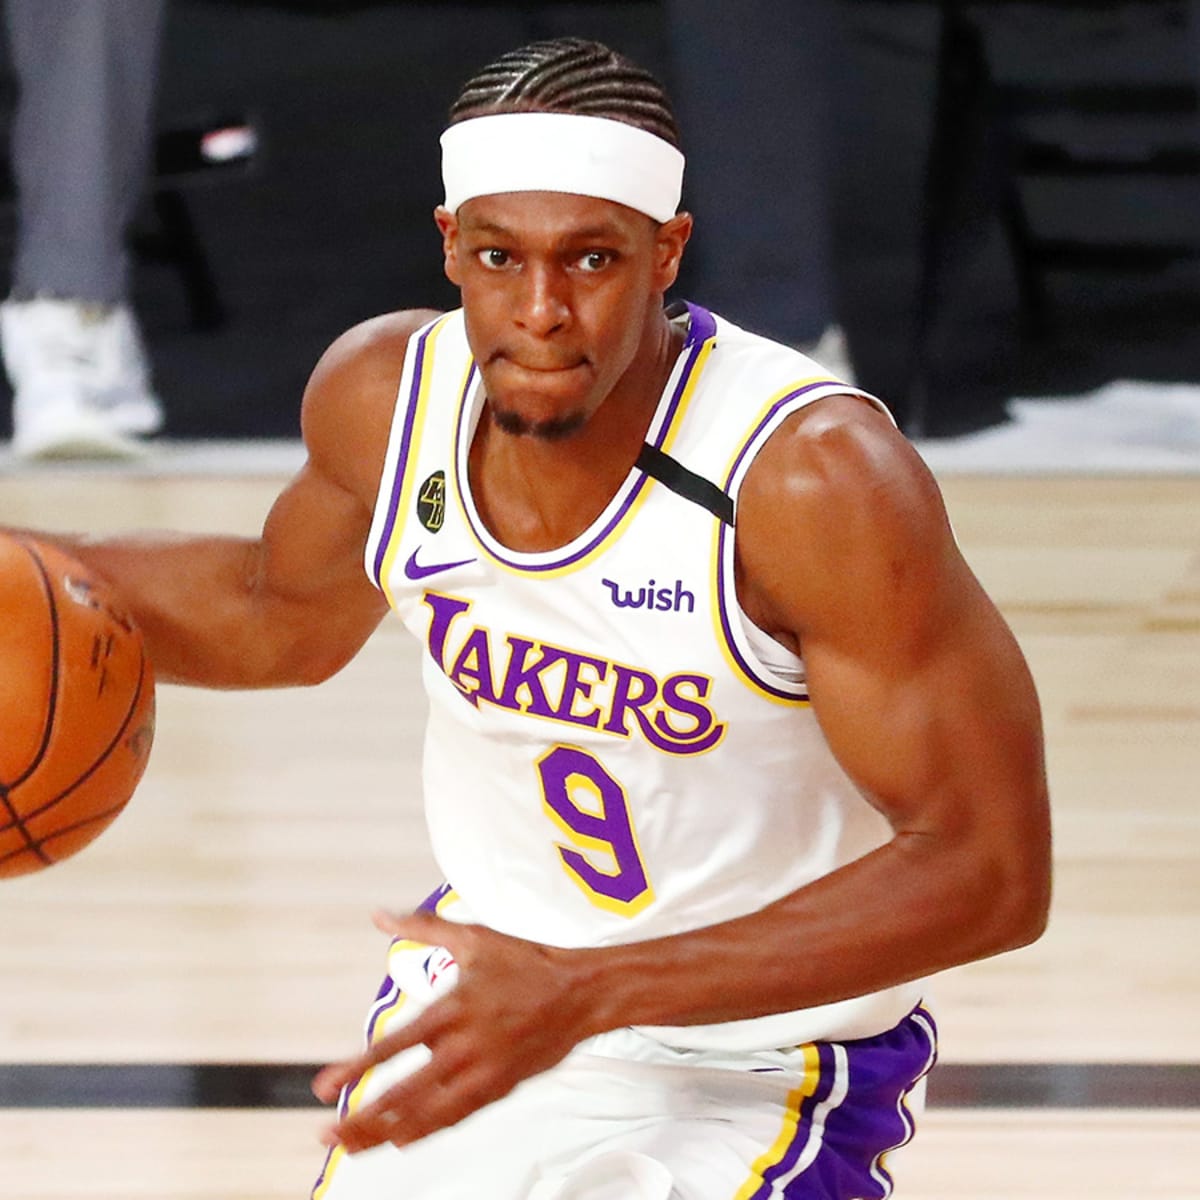 Is Rajon Rondo (All Of A Sudden) The Best Point Guard In The NBA?